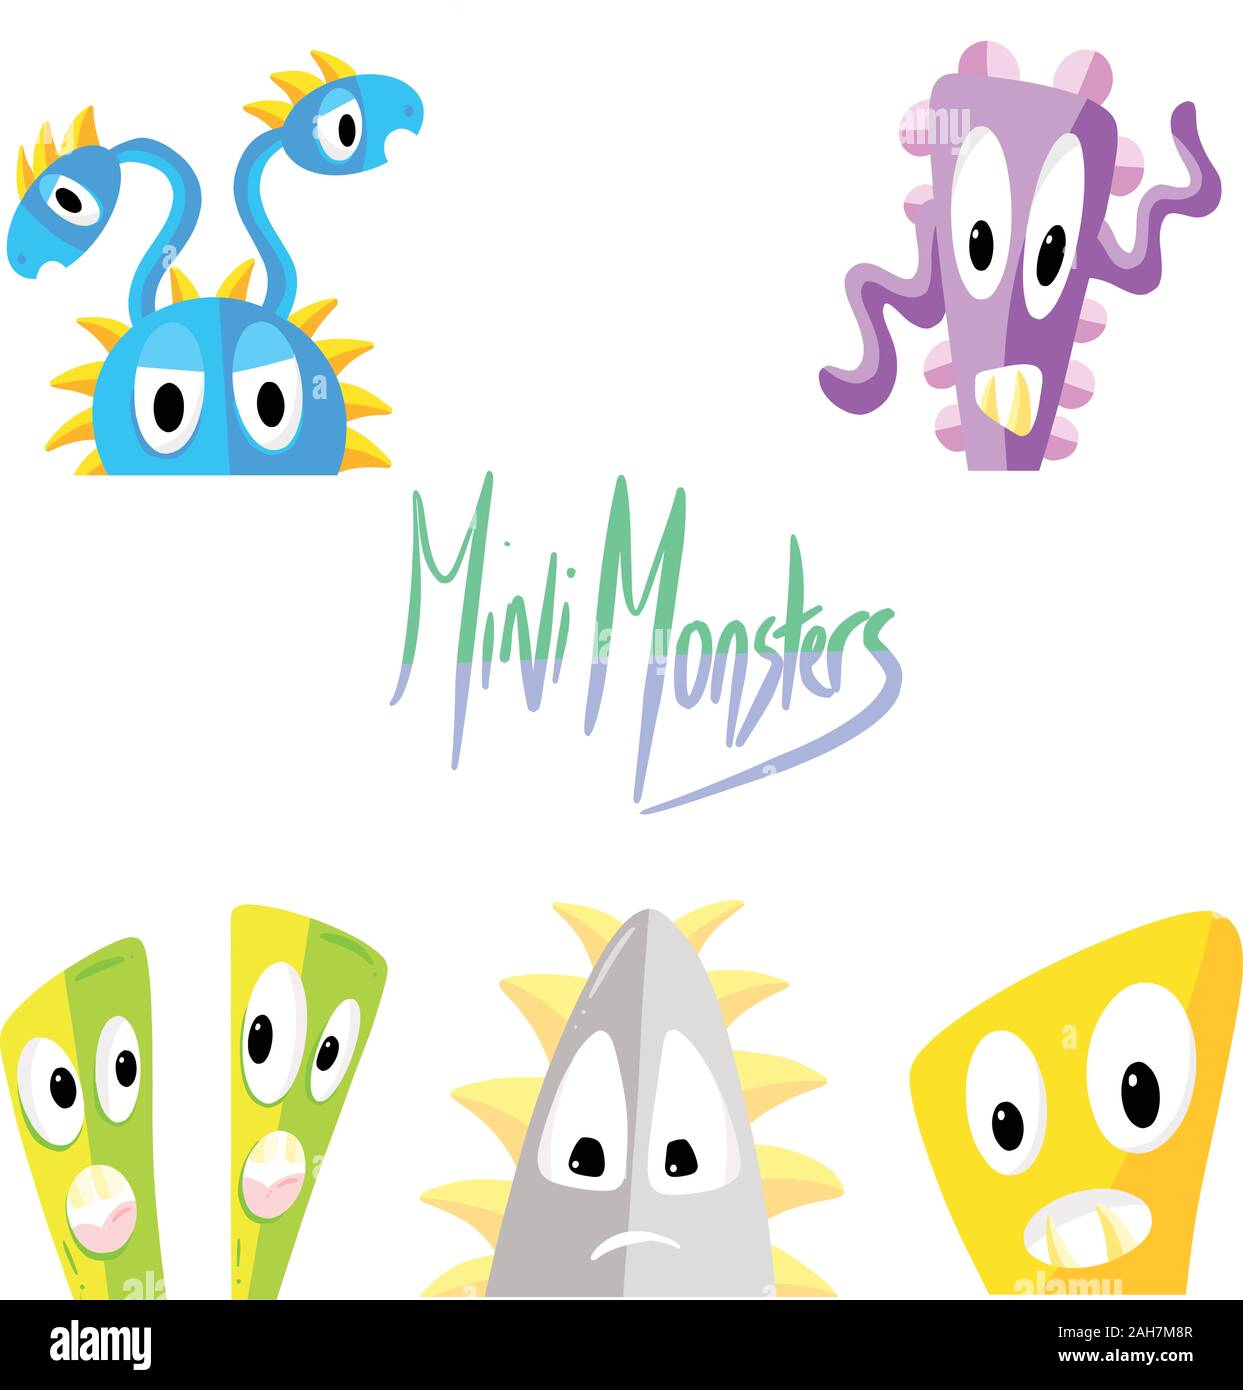 Collection of Mini Monster Fictional Imaginary Characters Cartoon Illustration Vectors Stock Vector